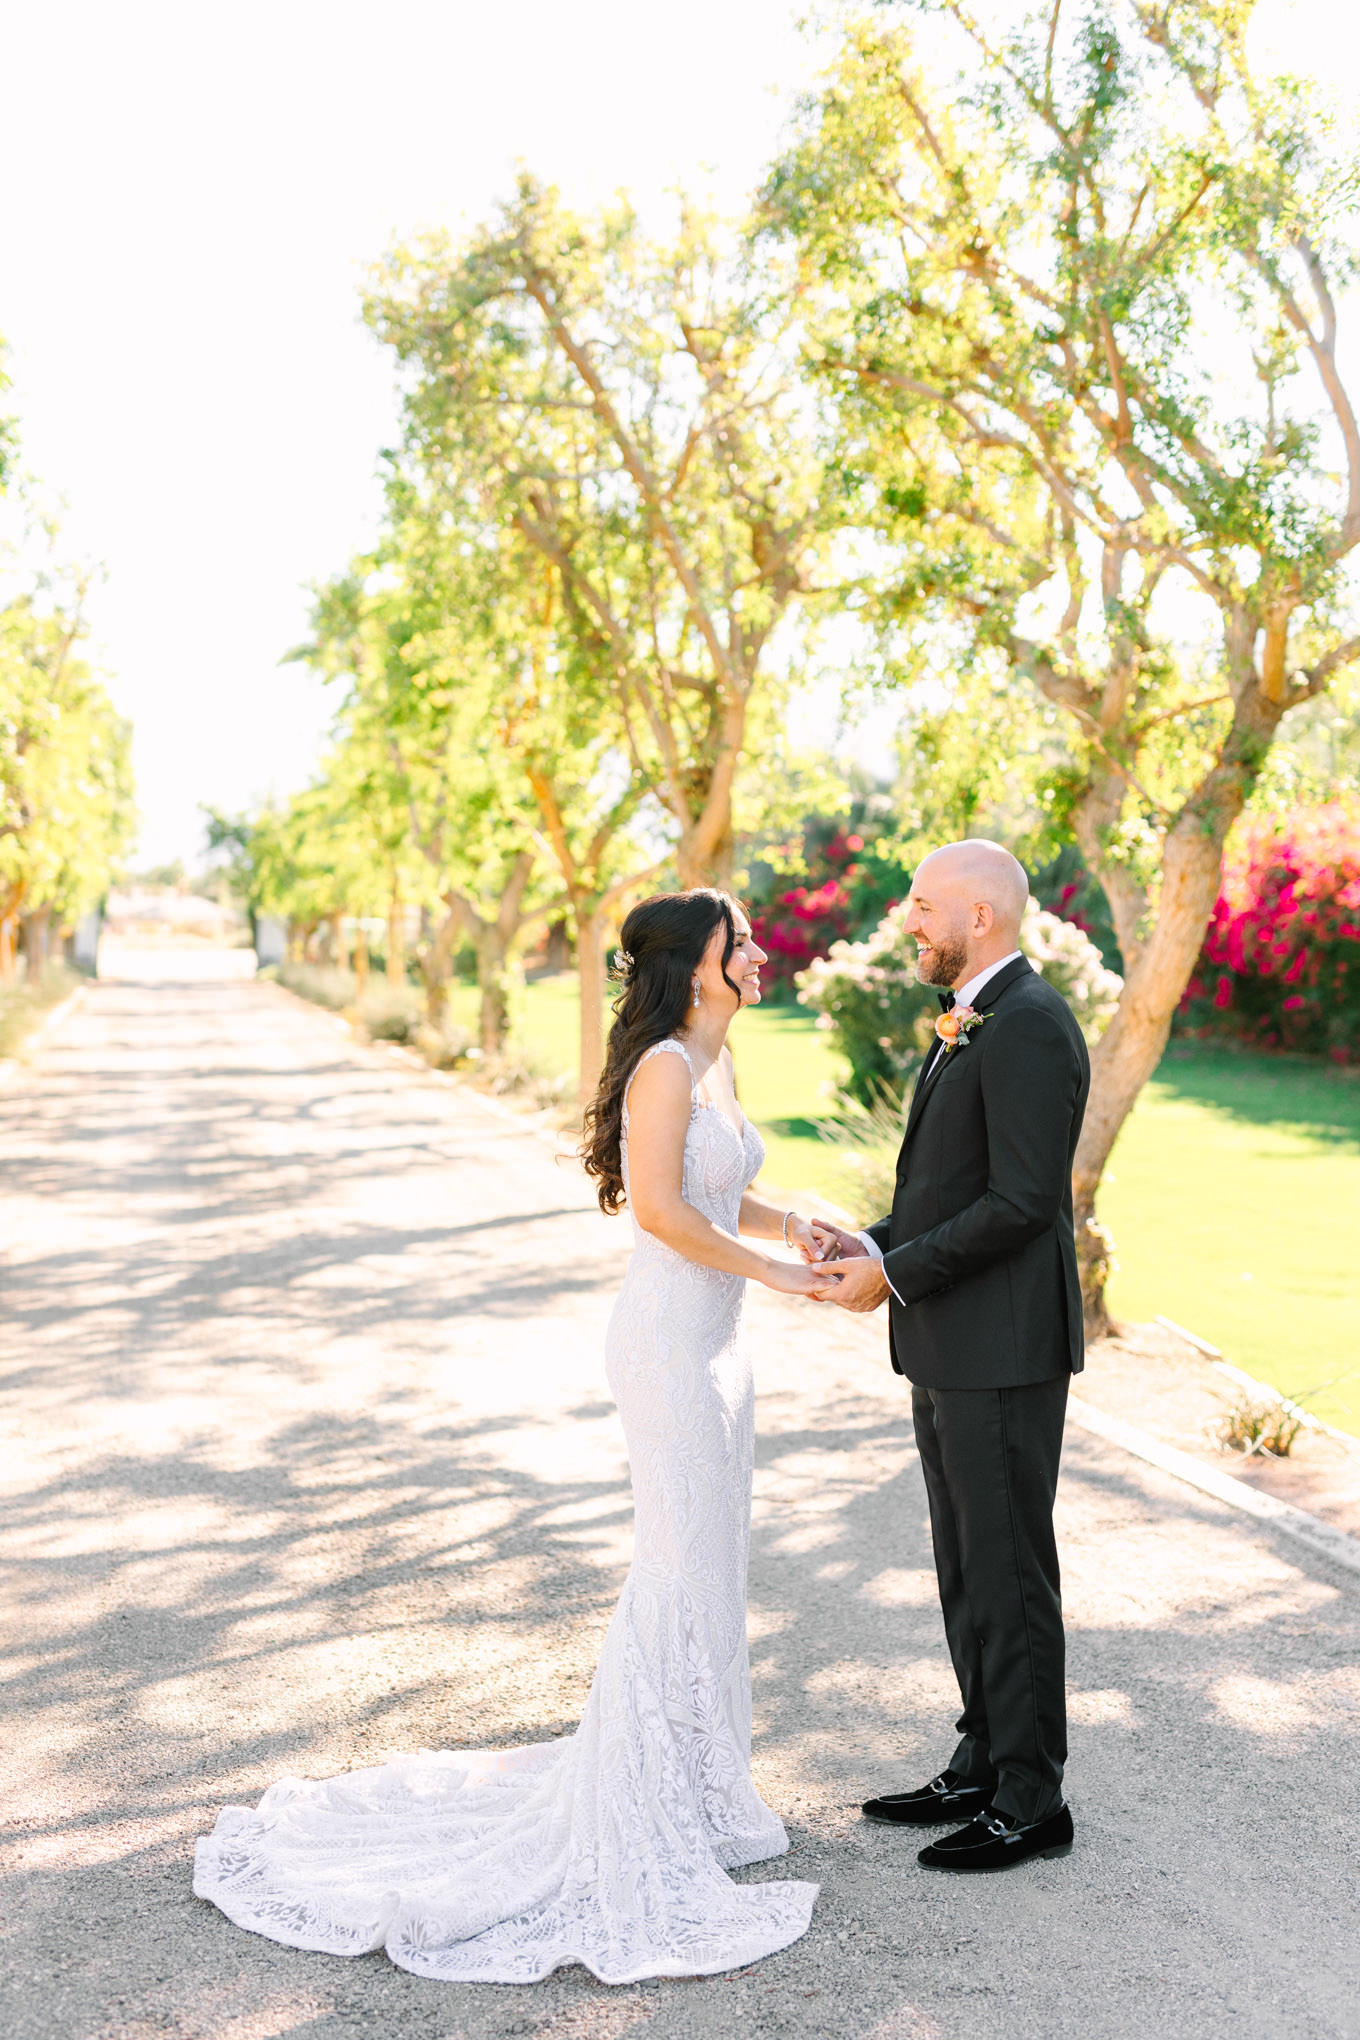 Bridal portraits | Pink Bougainvillea Estate wedding | Colorful LA wedding photography | #bougainvilleaestate #palmspringswedding #palmspringsweddingvenue #palmspringsphotographer Source: Mary Costa Photography | Los Angeles